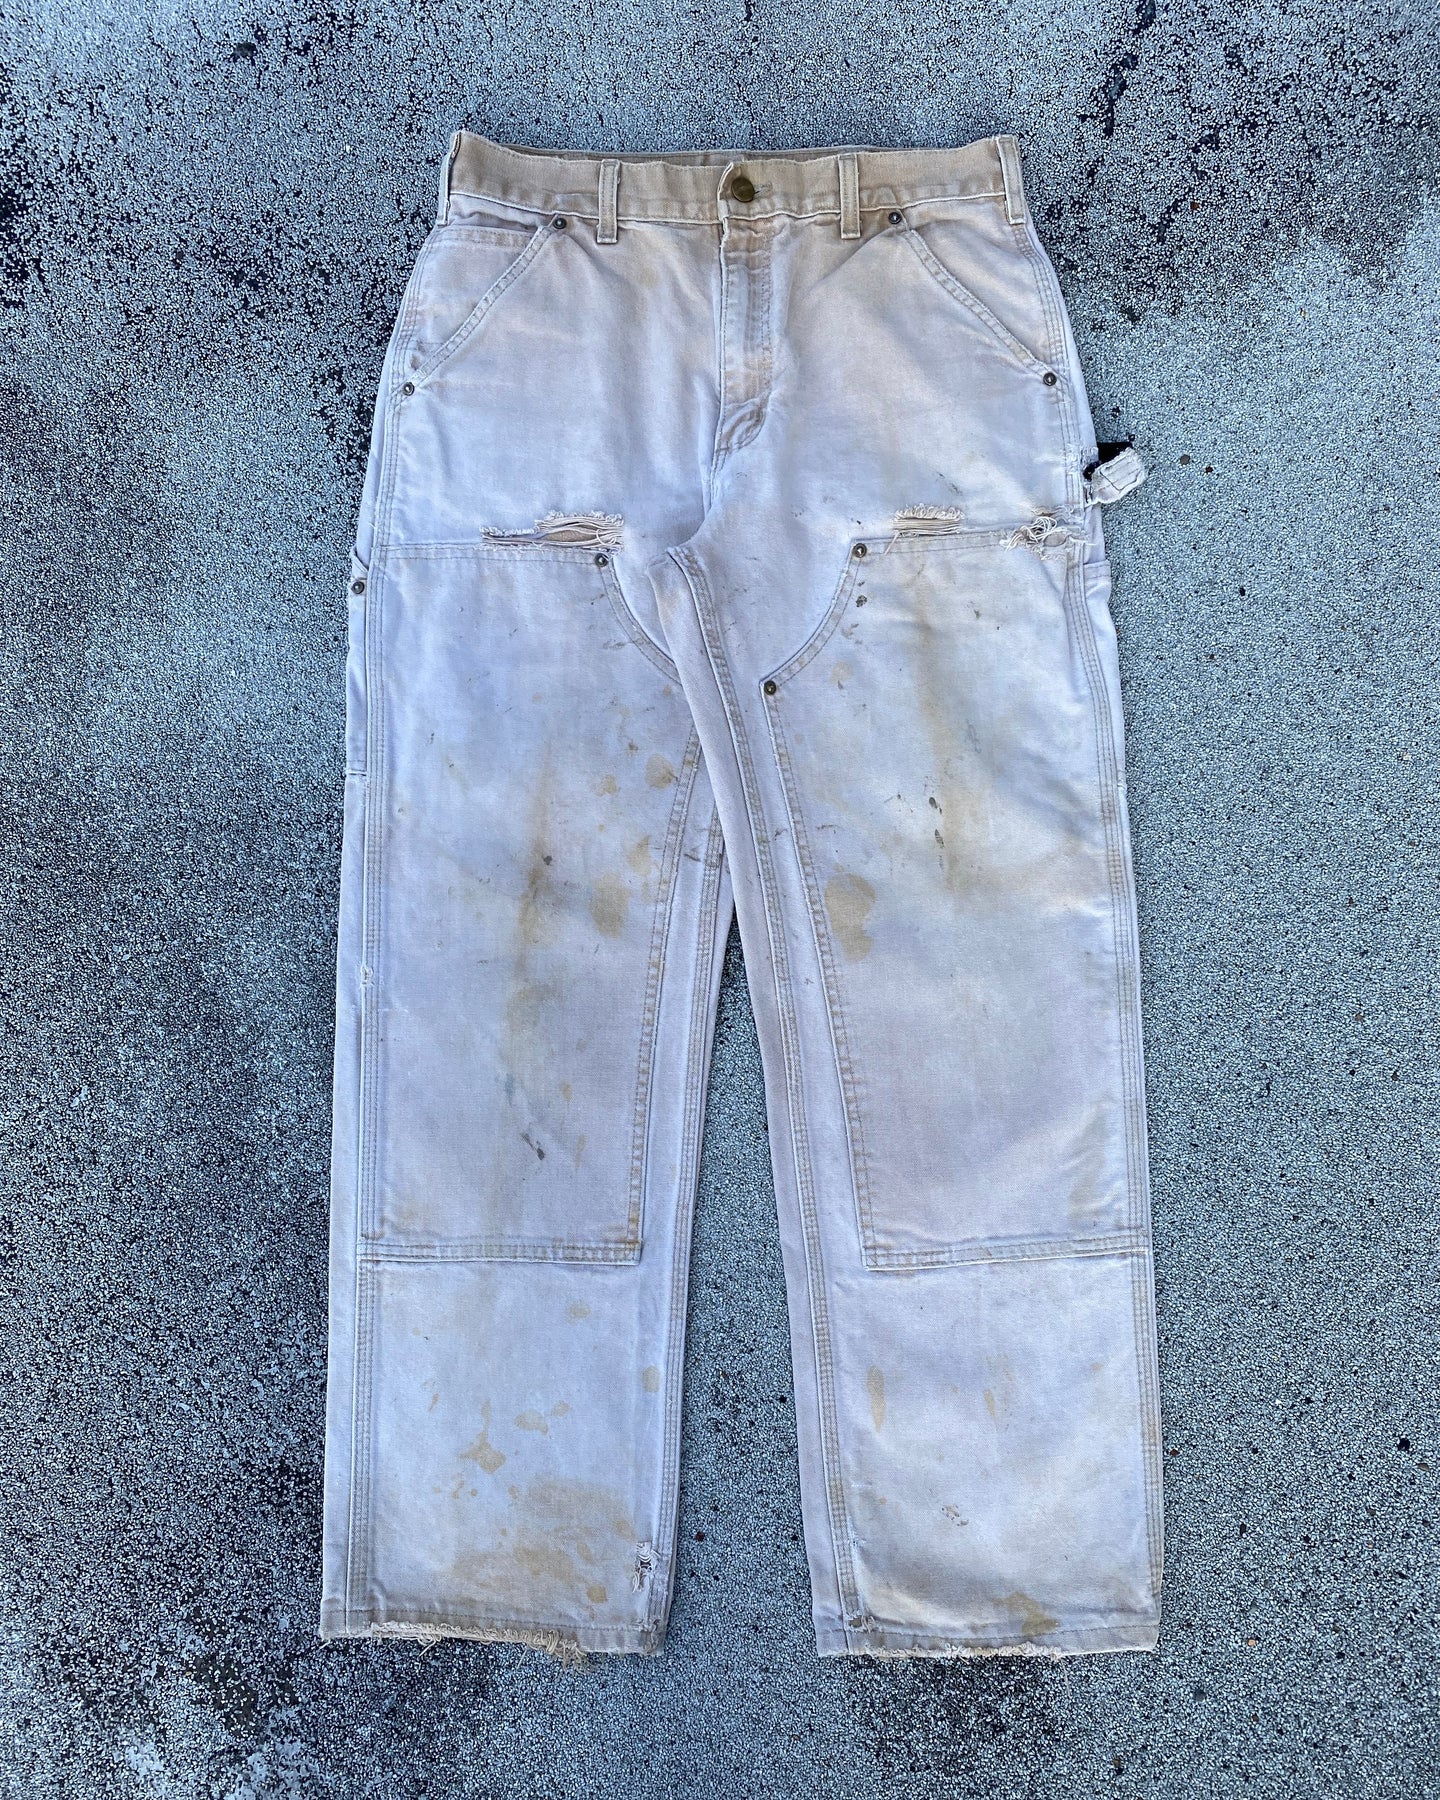 1990s Sun Bleached and Thrashed Cream Carhartt Double Knee Pants - Size 31 x 29